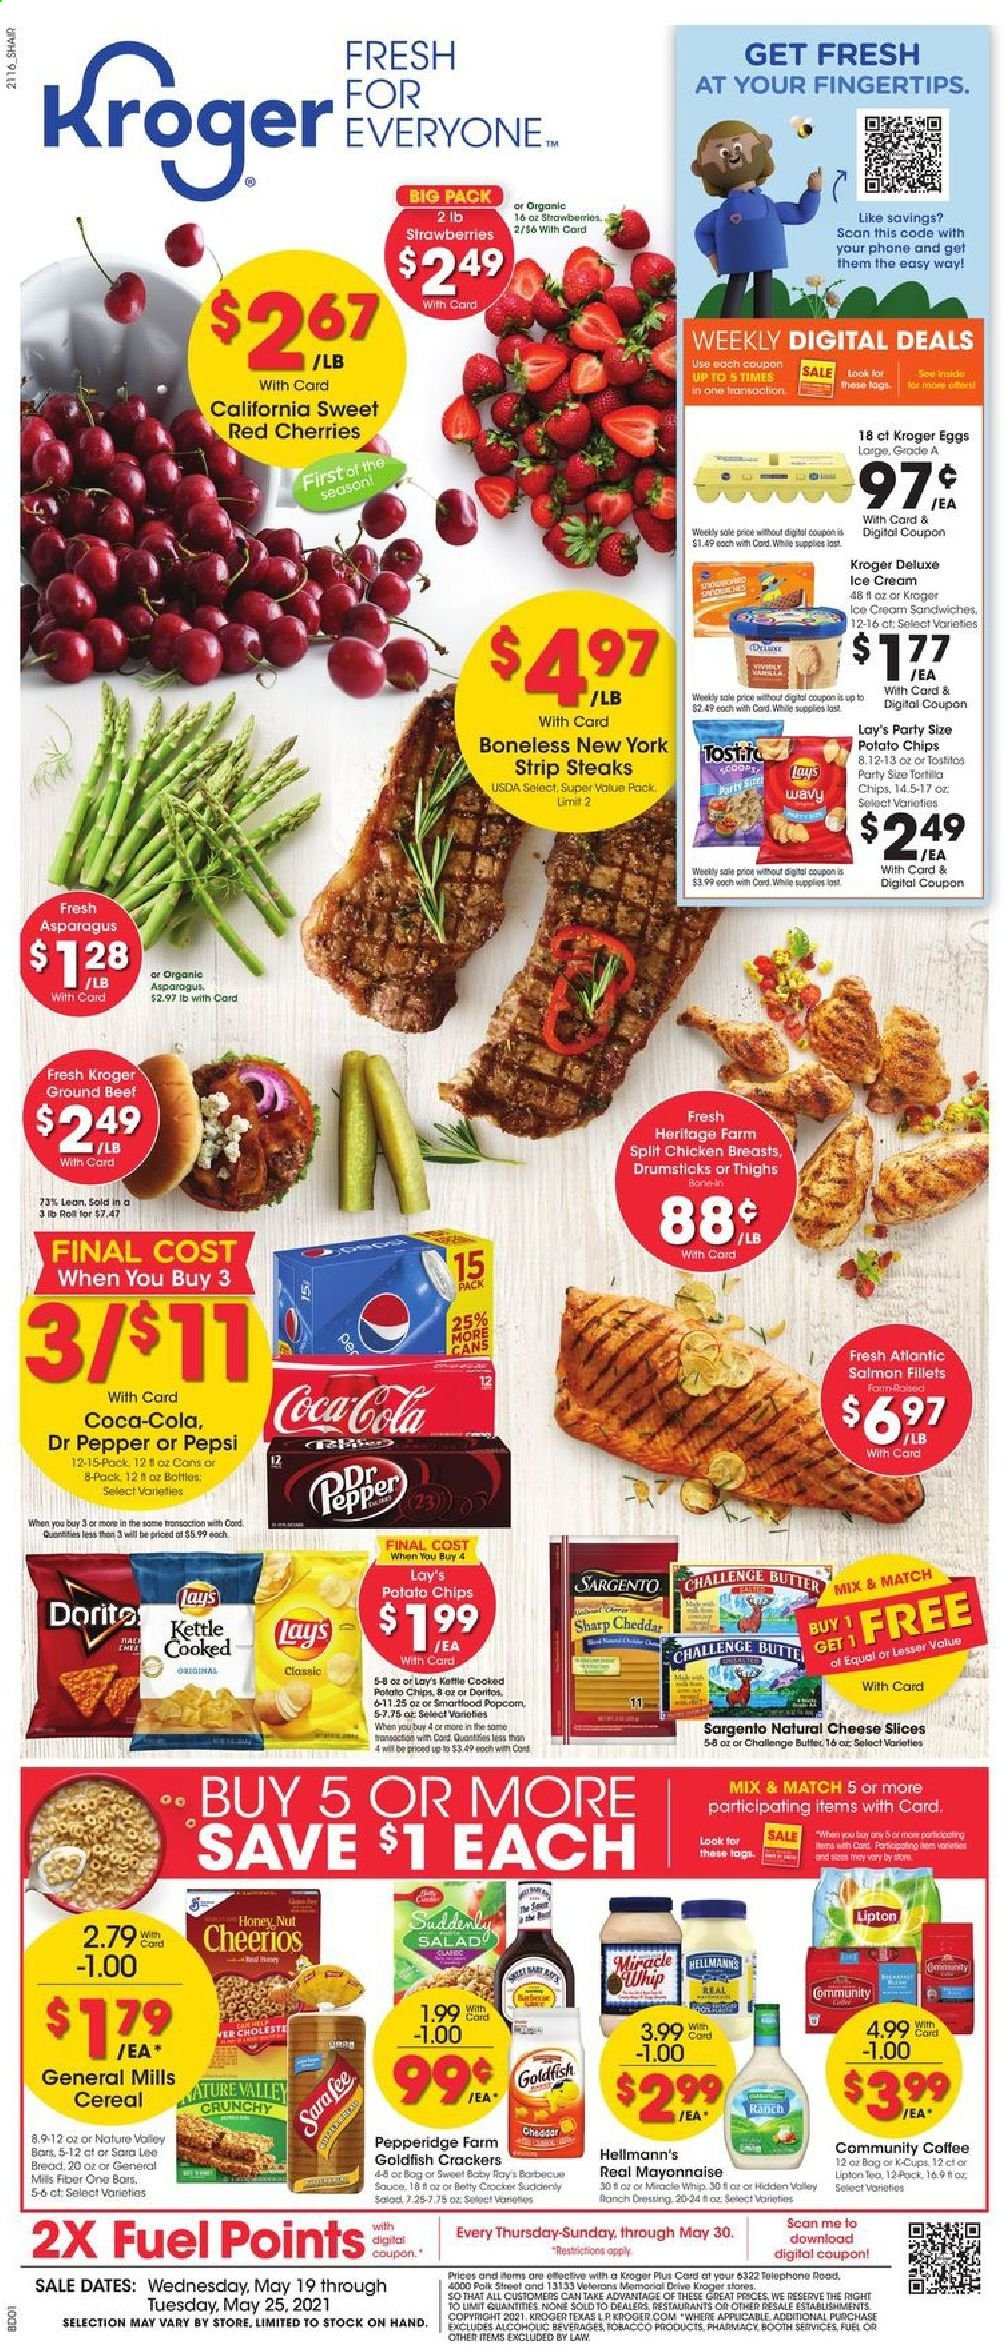 thumbnail - Kroger Flyer - 05/19/2021 - 05/25/2021 - Sales products - Sara Lee, asparagus, salad, strawberries, cherries, salmon, salmon fillet, sliced cheese, cheese, Sargento, eggs, butter, mayonnaise, Hellmann’s, ice cream, ice cream sandwich, crackers, potato chips, chips, Lay’s, Goldfish, Tostitos, cereals, Cheerios, Fiber One, Coca-Cola, Pepsi, Lipton, Dr. Pepper, coffee, coffee capsules, K-Cups, chicken breasts, beef meat, ground beef, steak, striploin steak. Page 1.